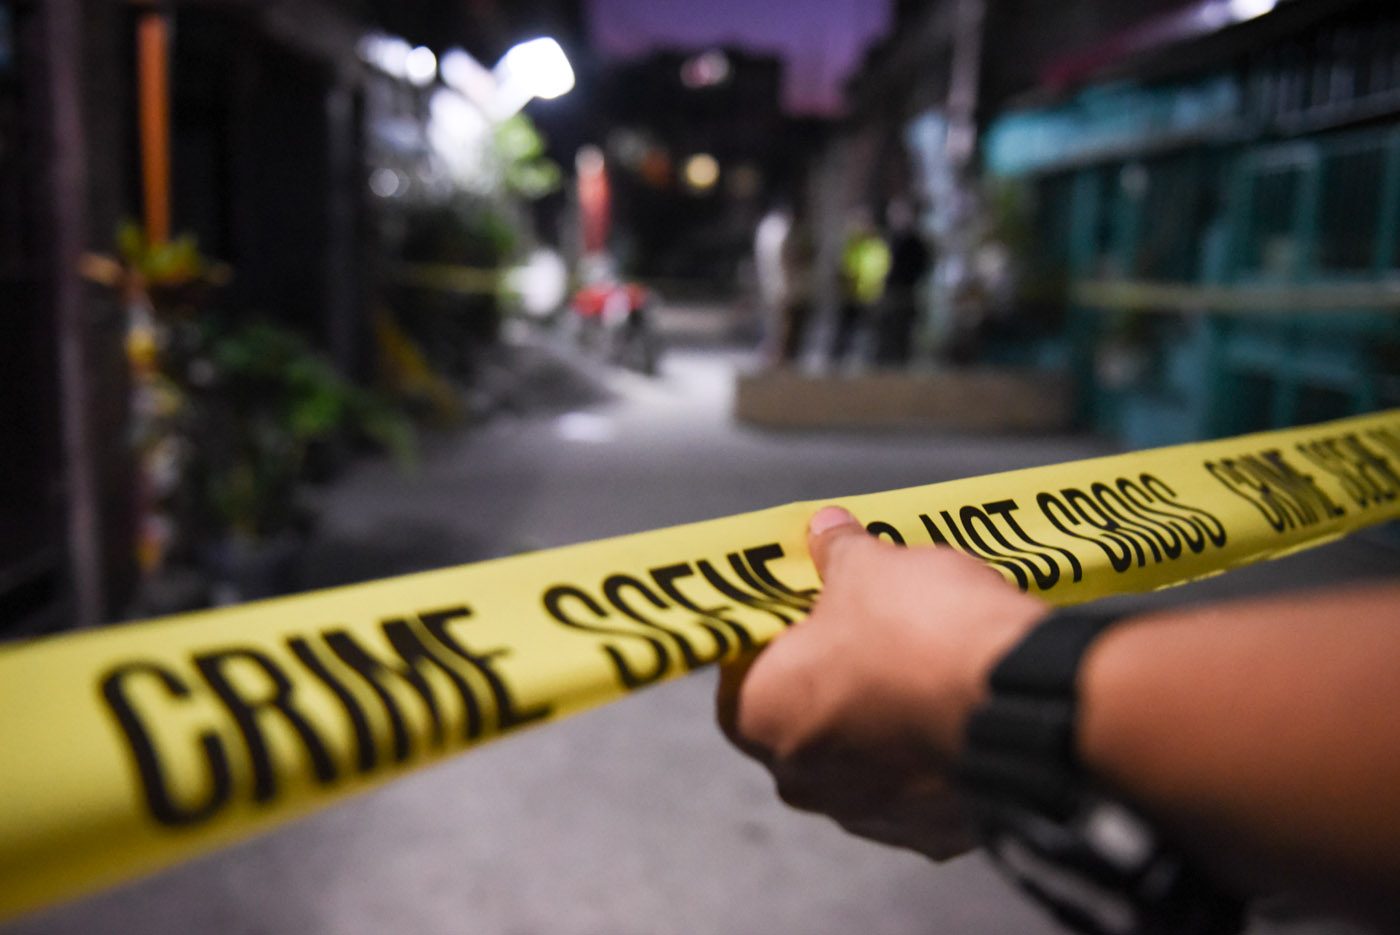 Fear of robbery, unsafe streets, drug addicts up in Mindanao – SWS